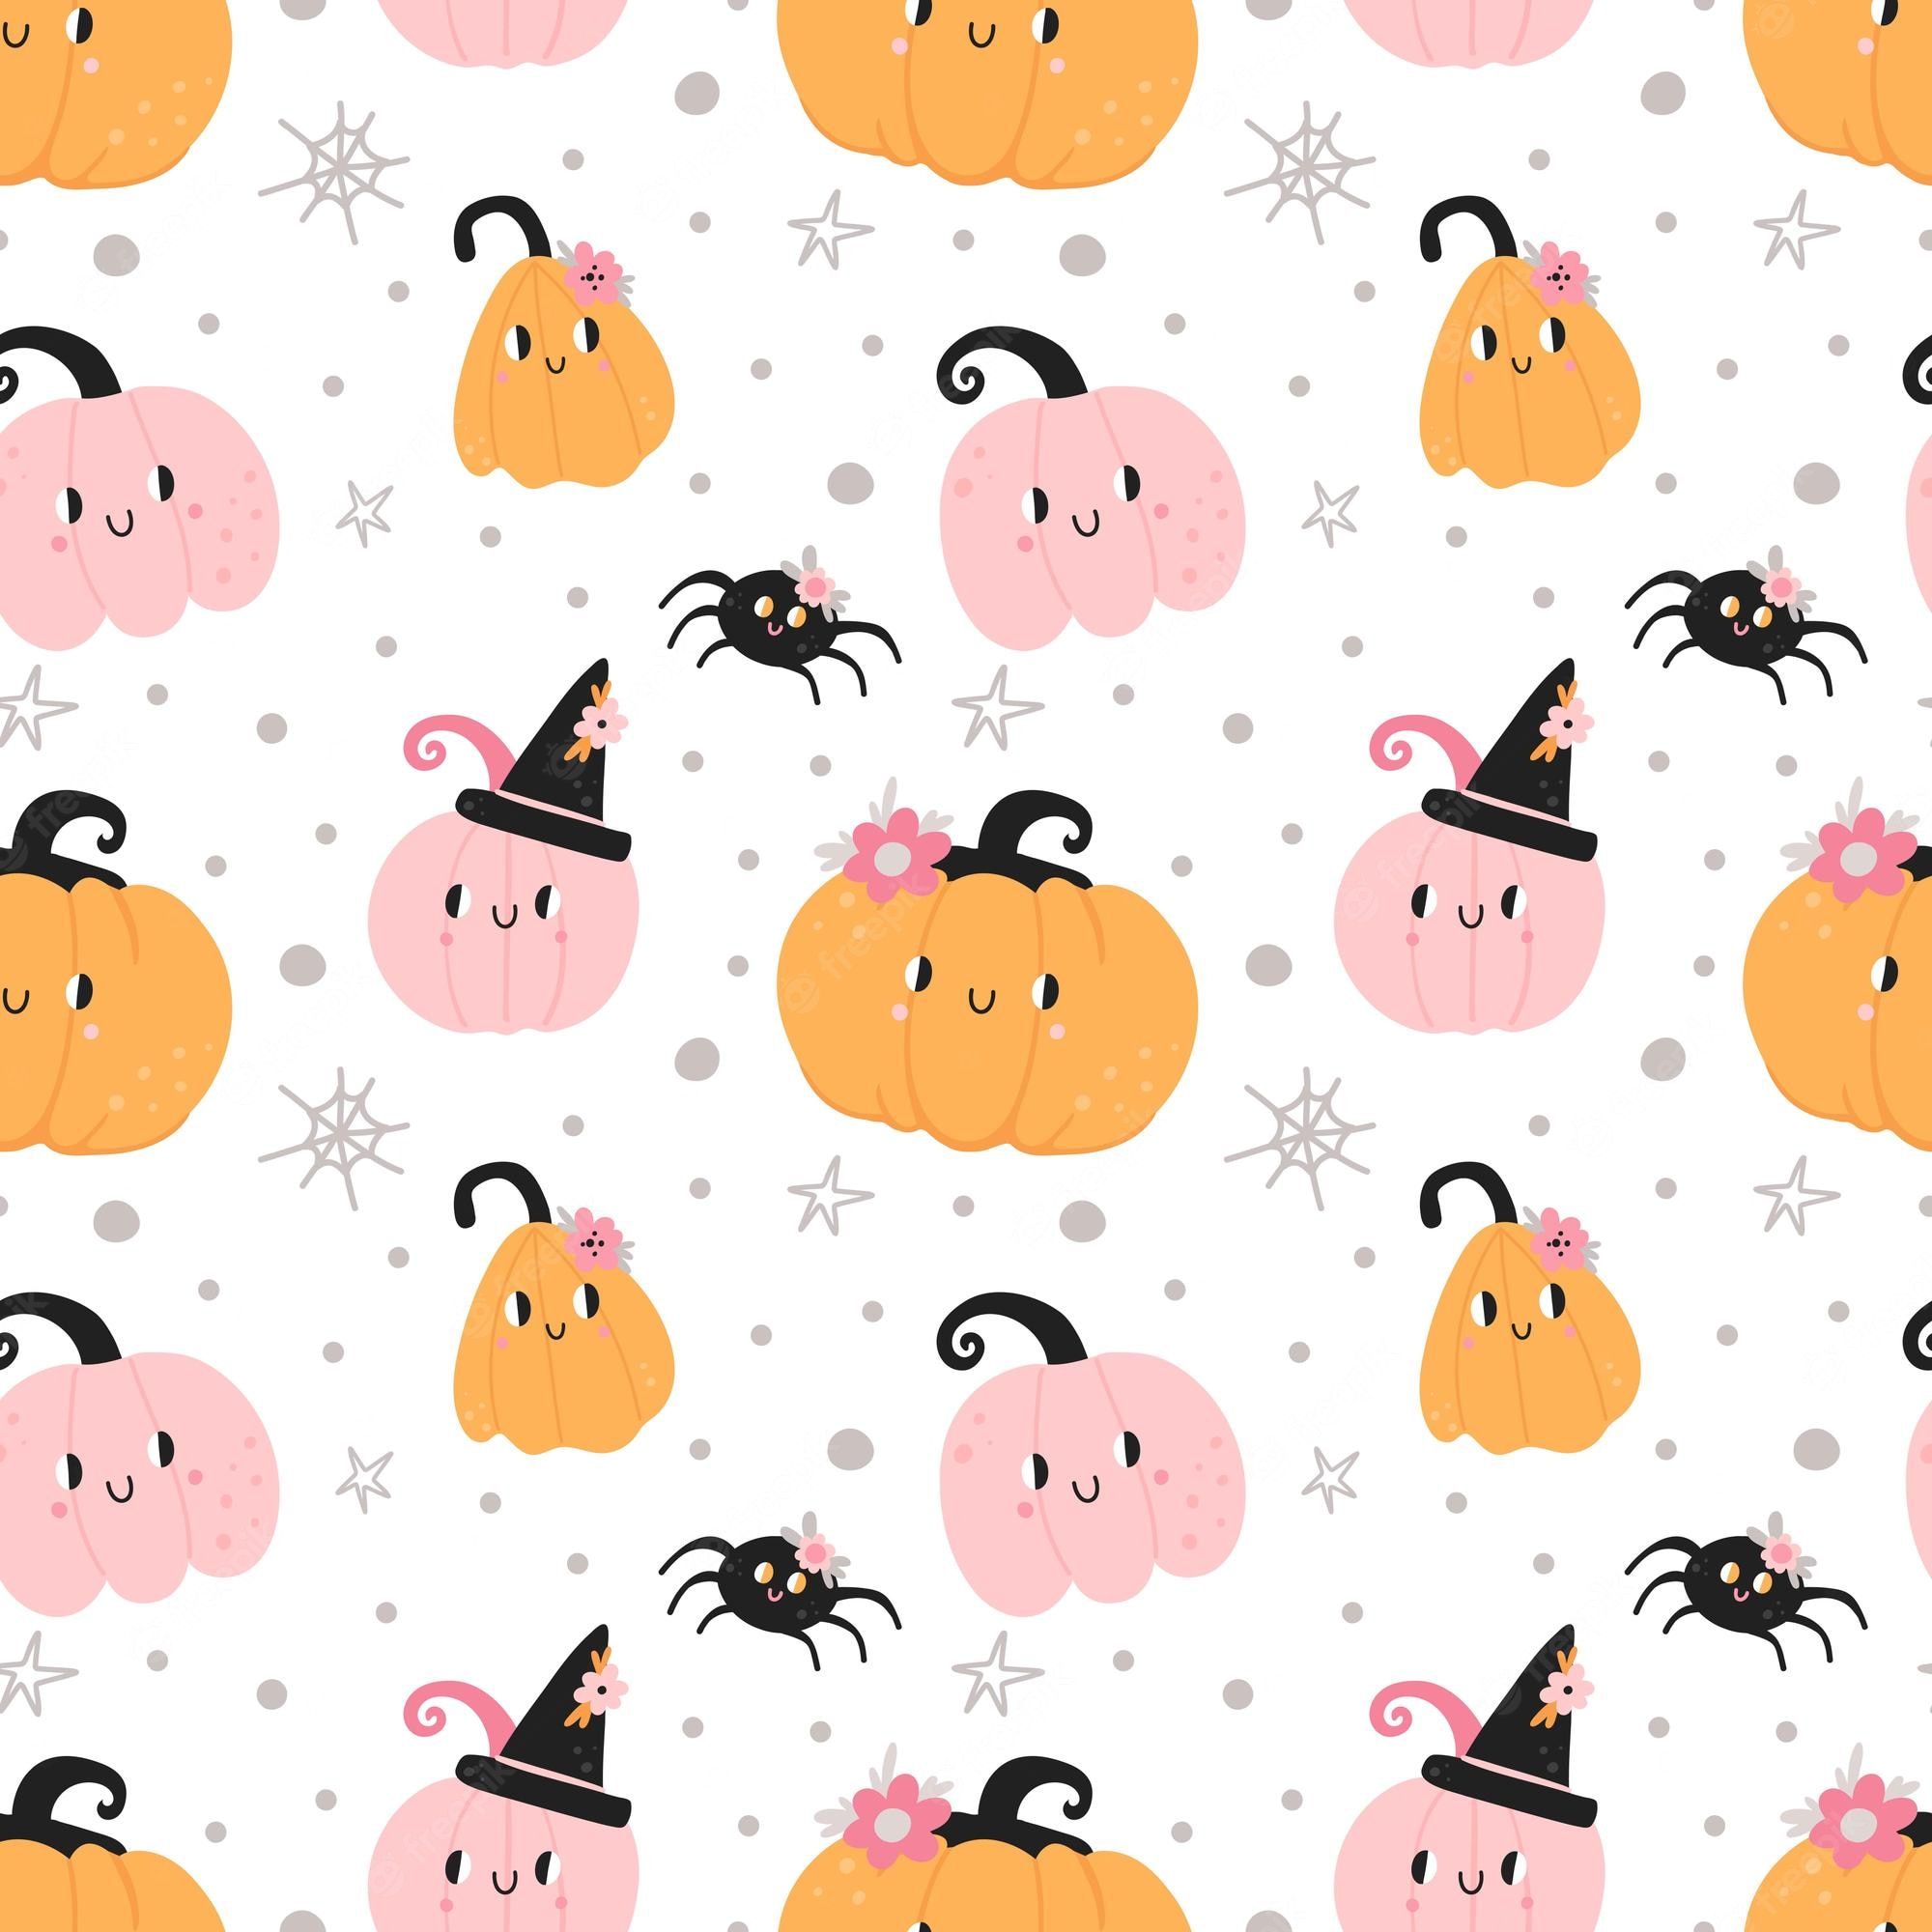 A pattern of smiling pumpkins and spiders. - Cute Halloween